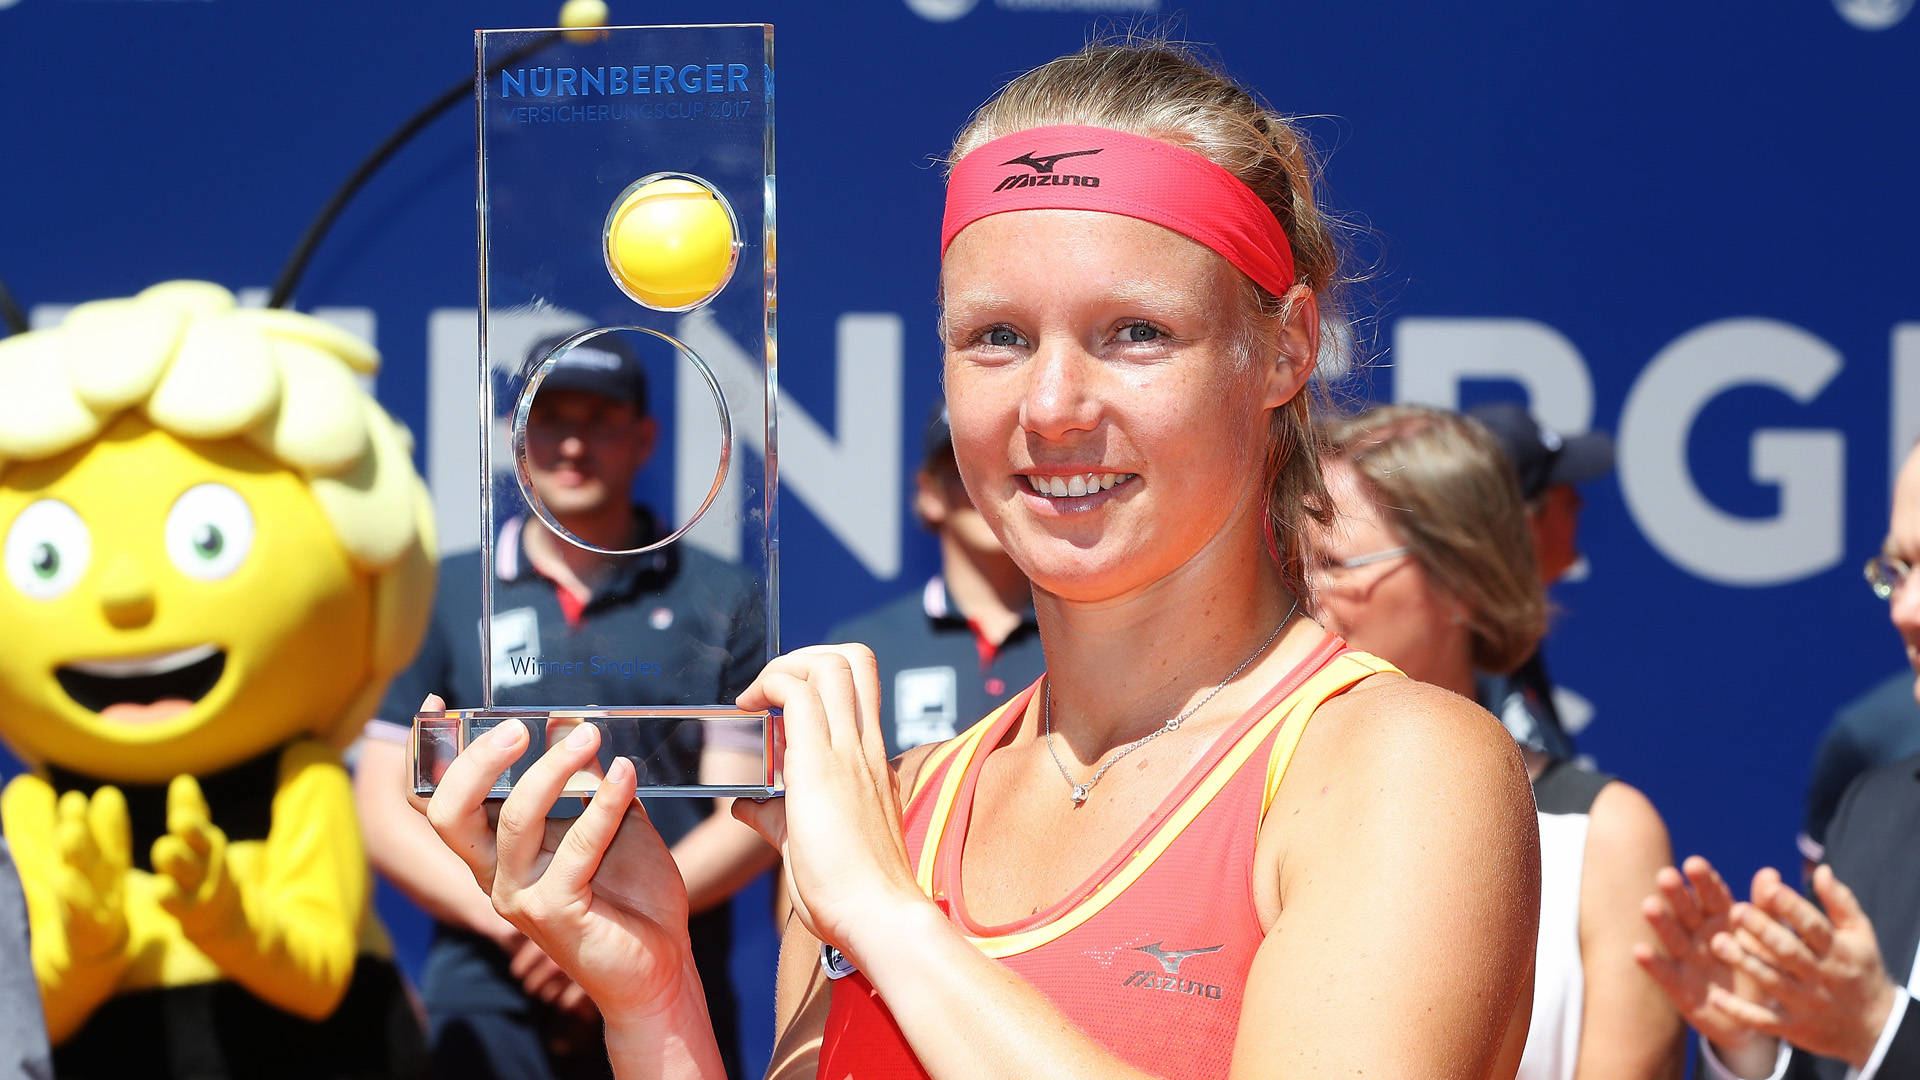 A Grand Victory - Kiki Bertens Proudly Poses with Trophy Wallpaper